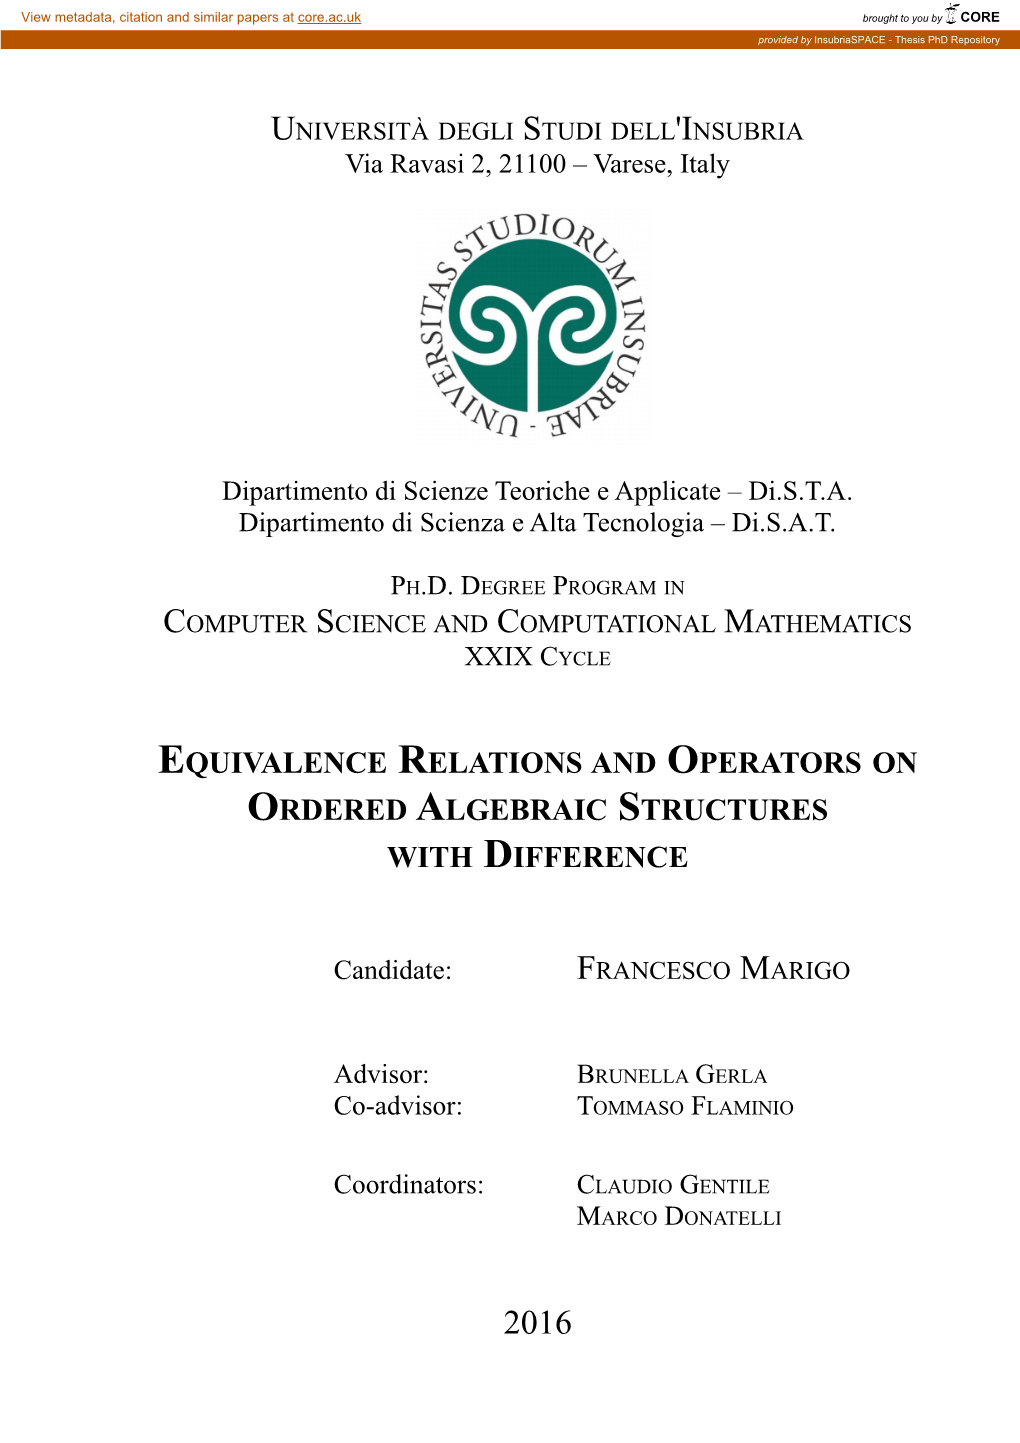 Equivalence Relations and Operators on Ordered Algebraic Structures with Difference